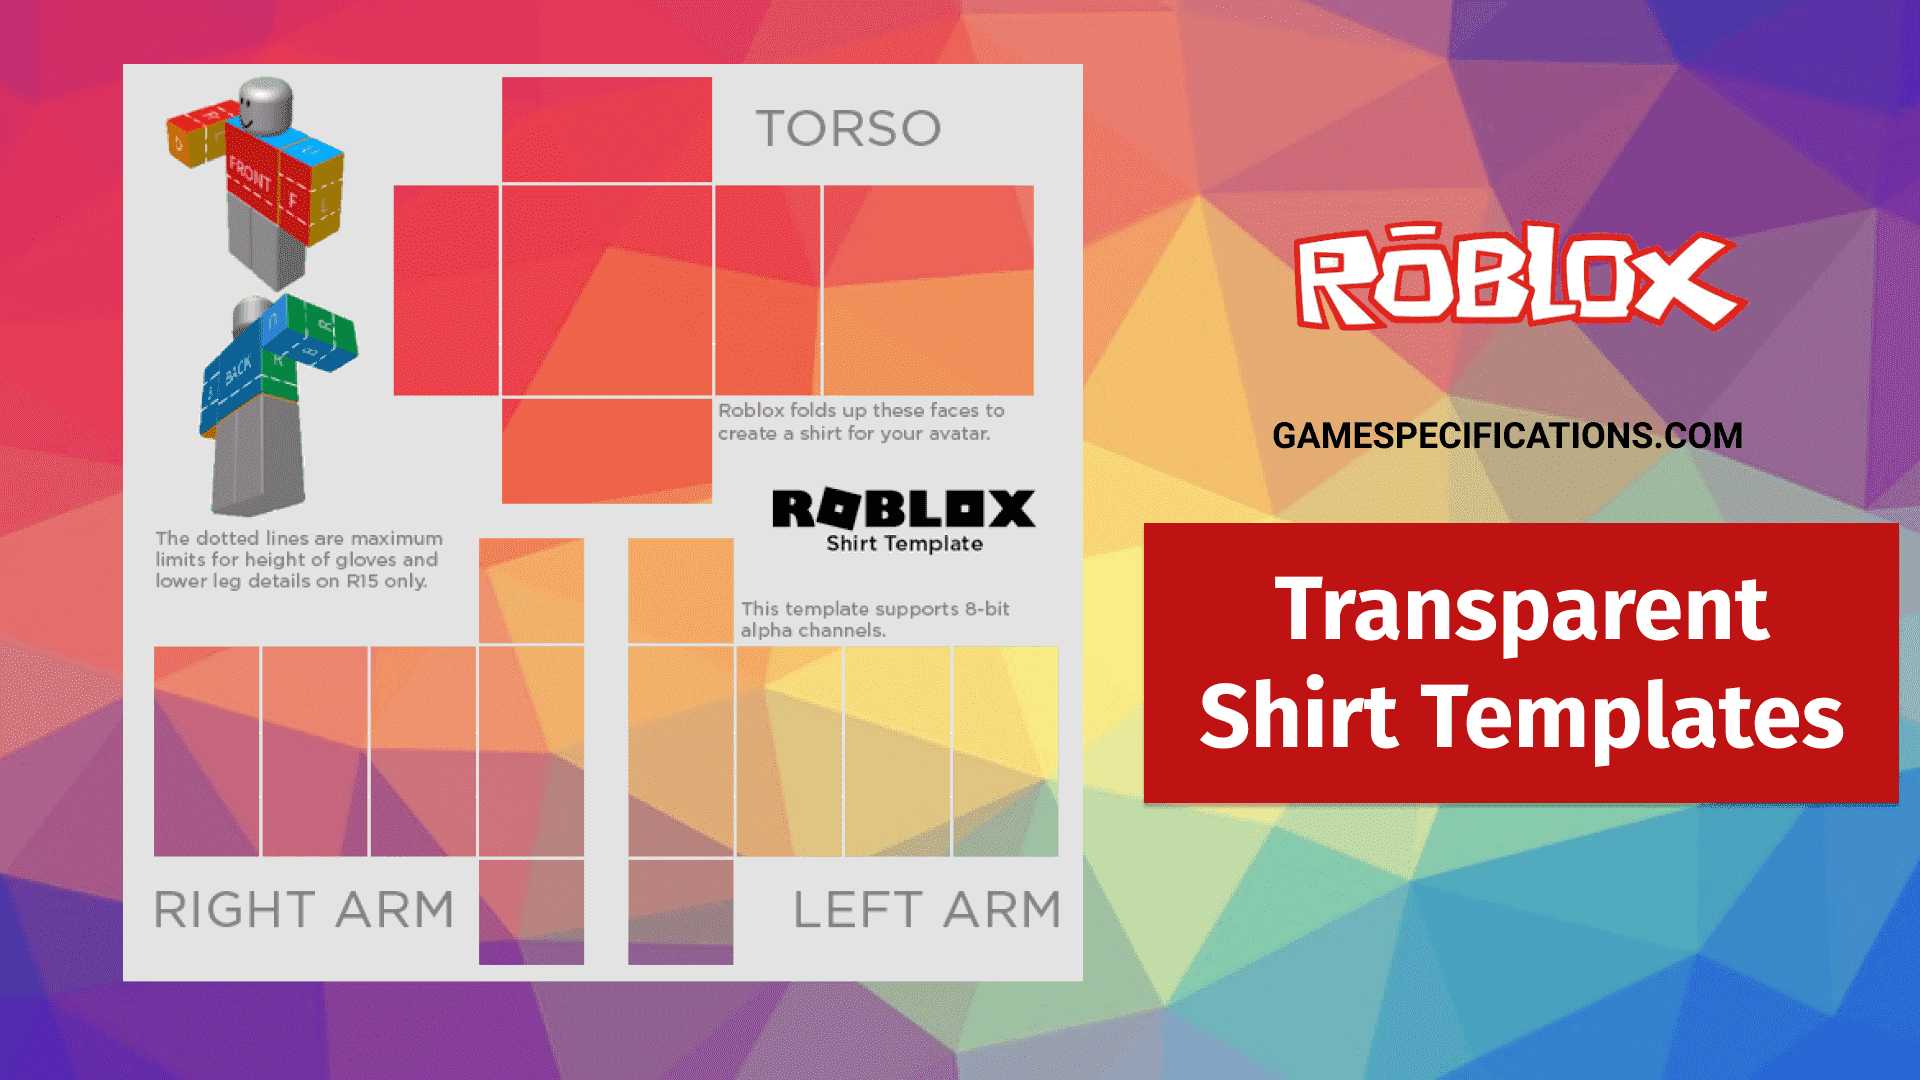 Roblox Transparent Shirt Templates And How To Make Them Game Specifications - roblox shirt template green